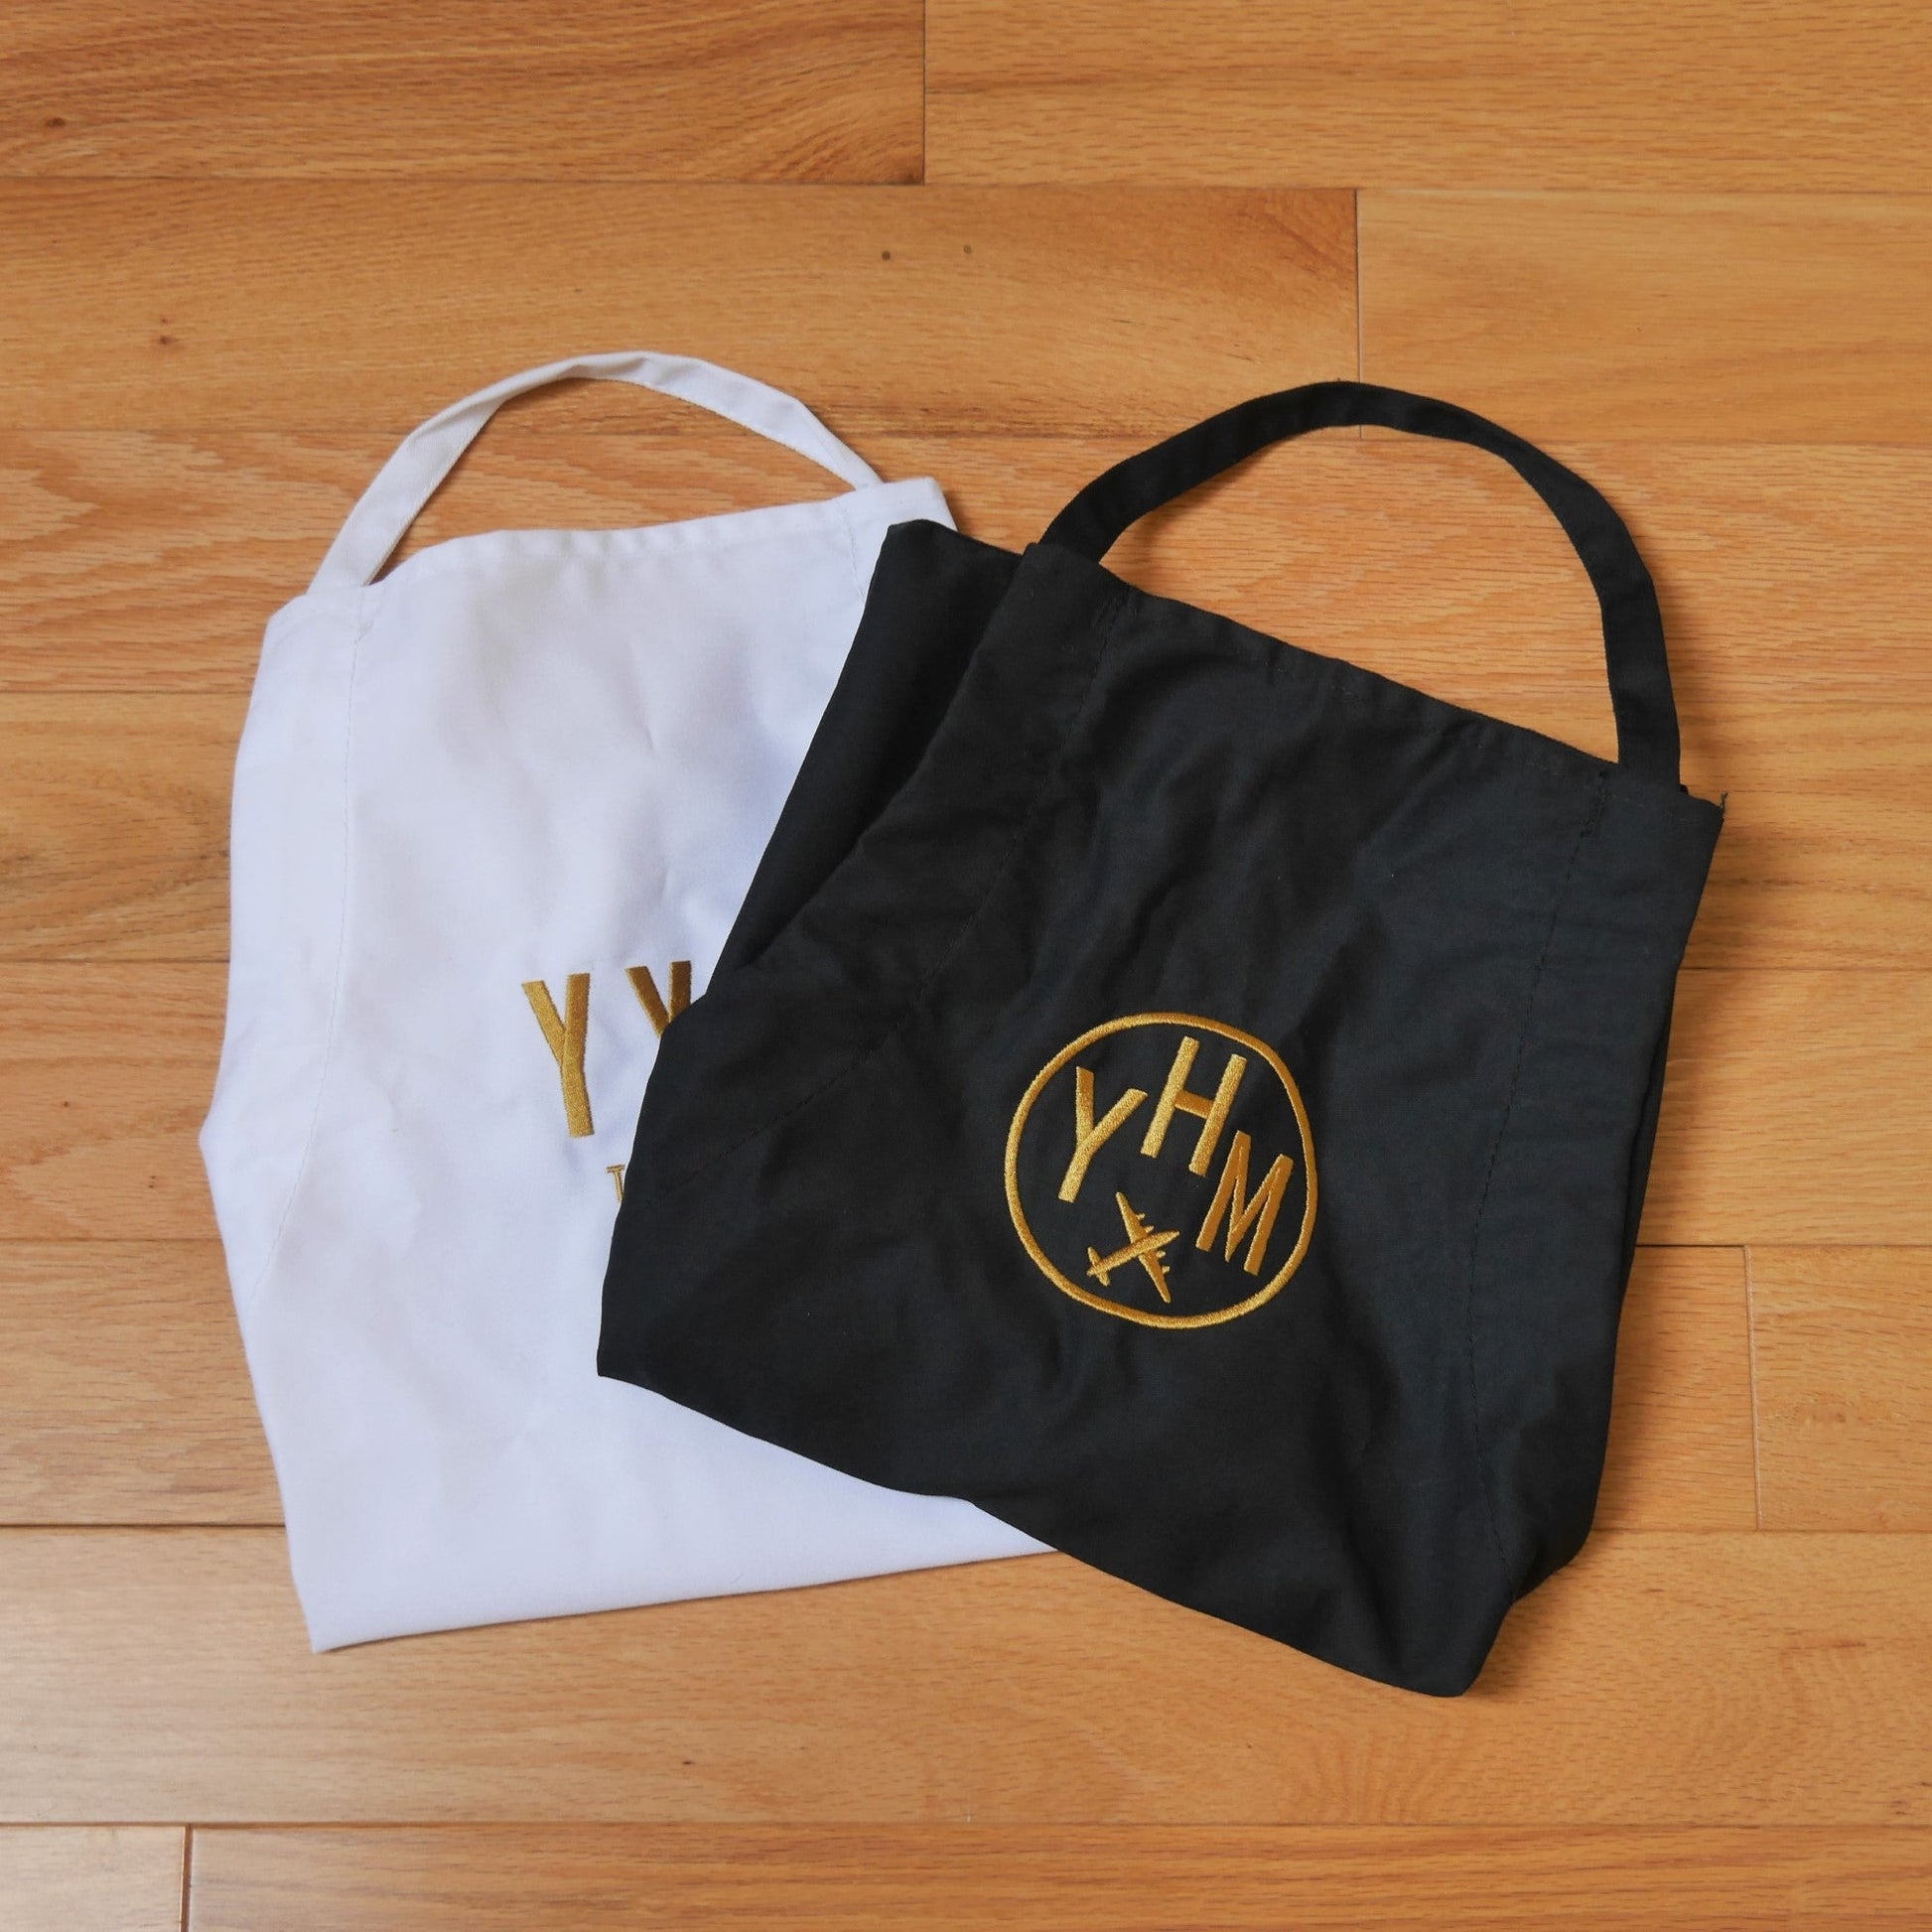 City Embroidered Apron - Old Gold • DCA Washington • YHM Designs - Image 14